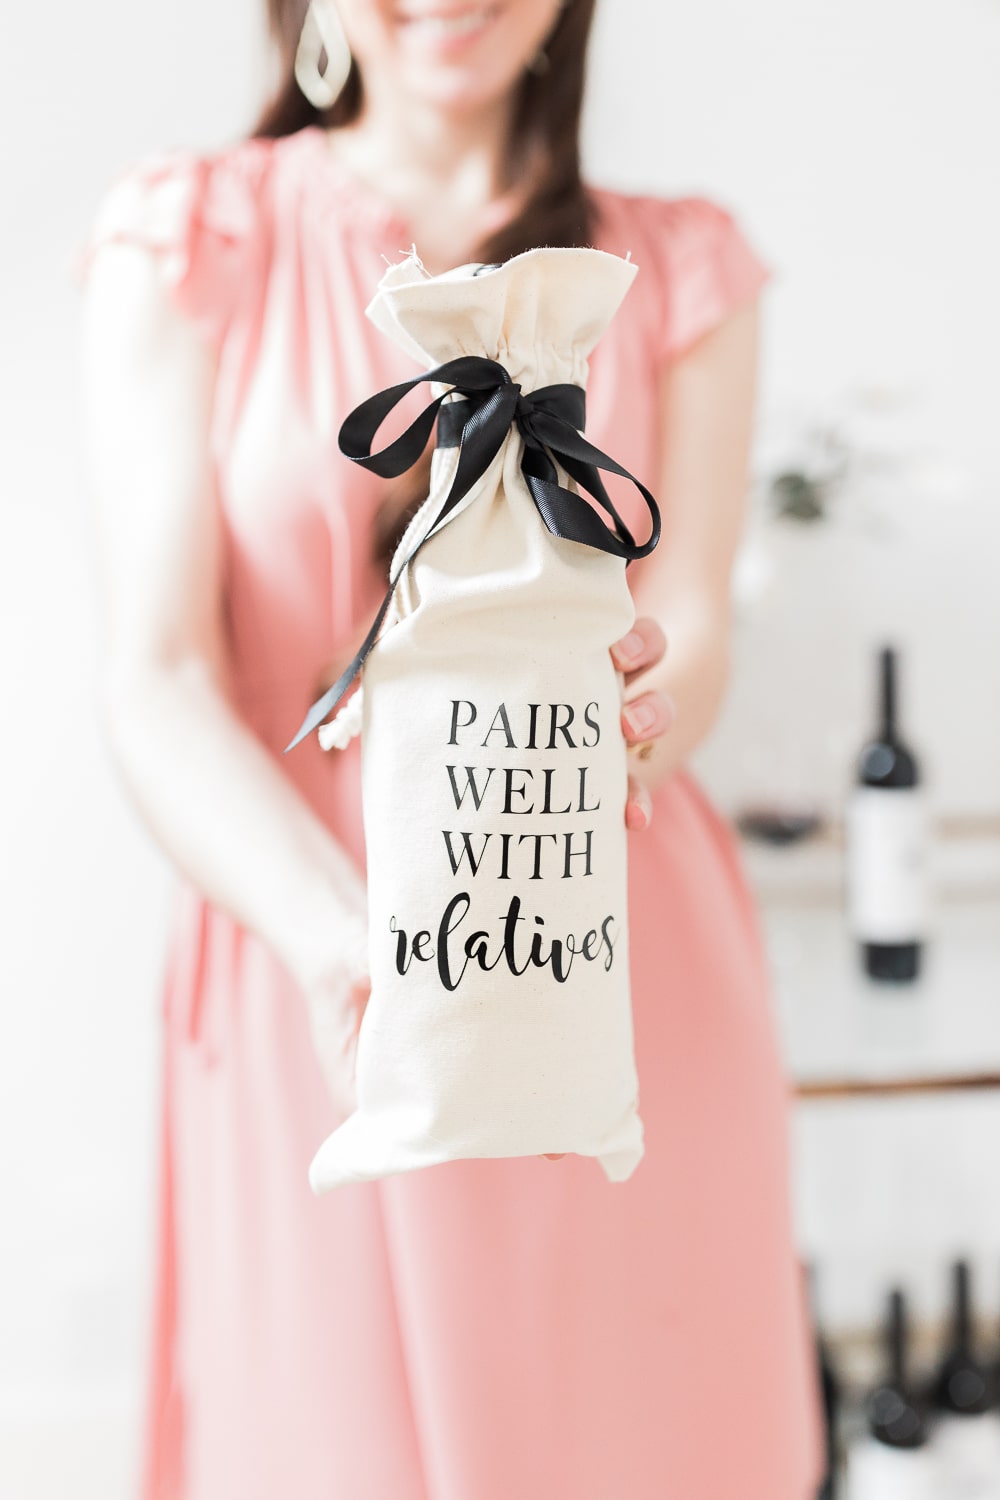 DIY wine bottle gift bags tutorial for fall by blogger Stephanie Ziajka on Diary of a Debutante